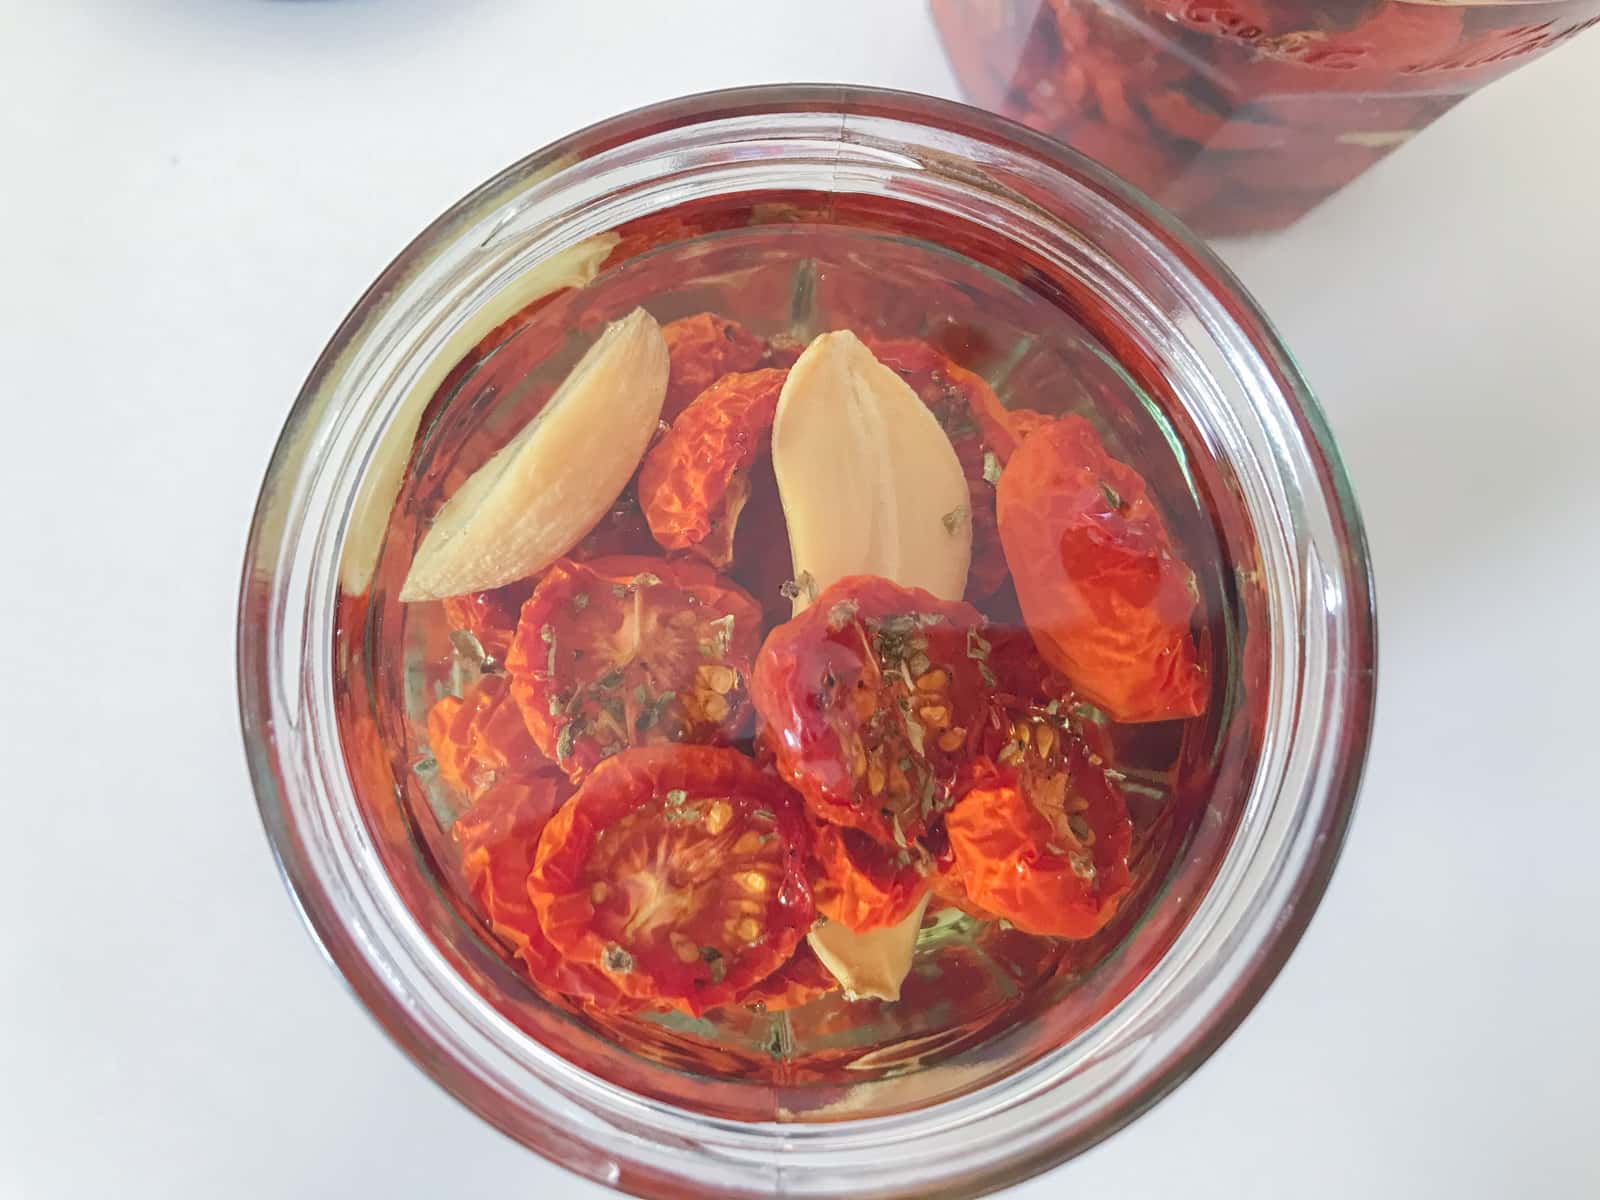 Oven roasted halved cherry tomatoes in a glass jar with confit garlic and topped with olive oil to preserve.